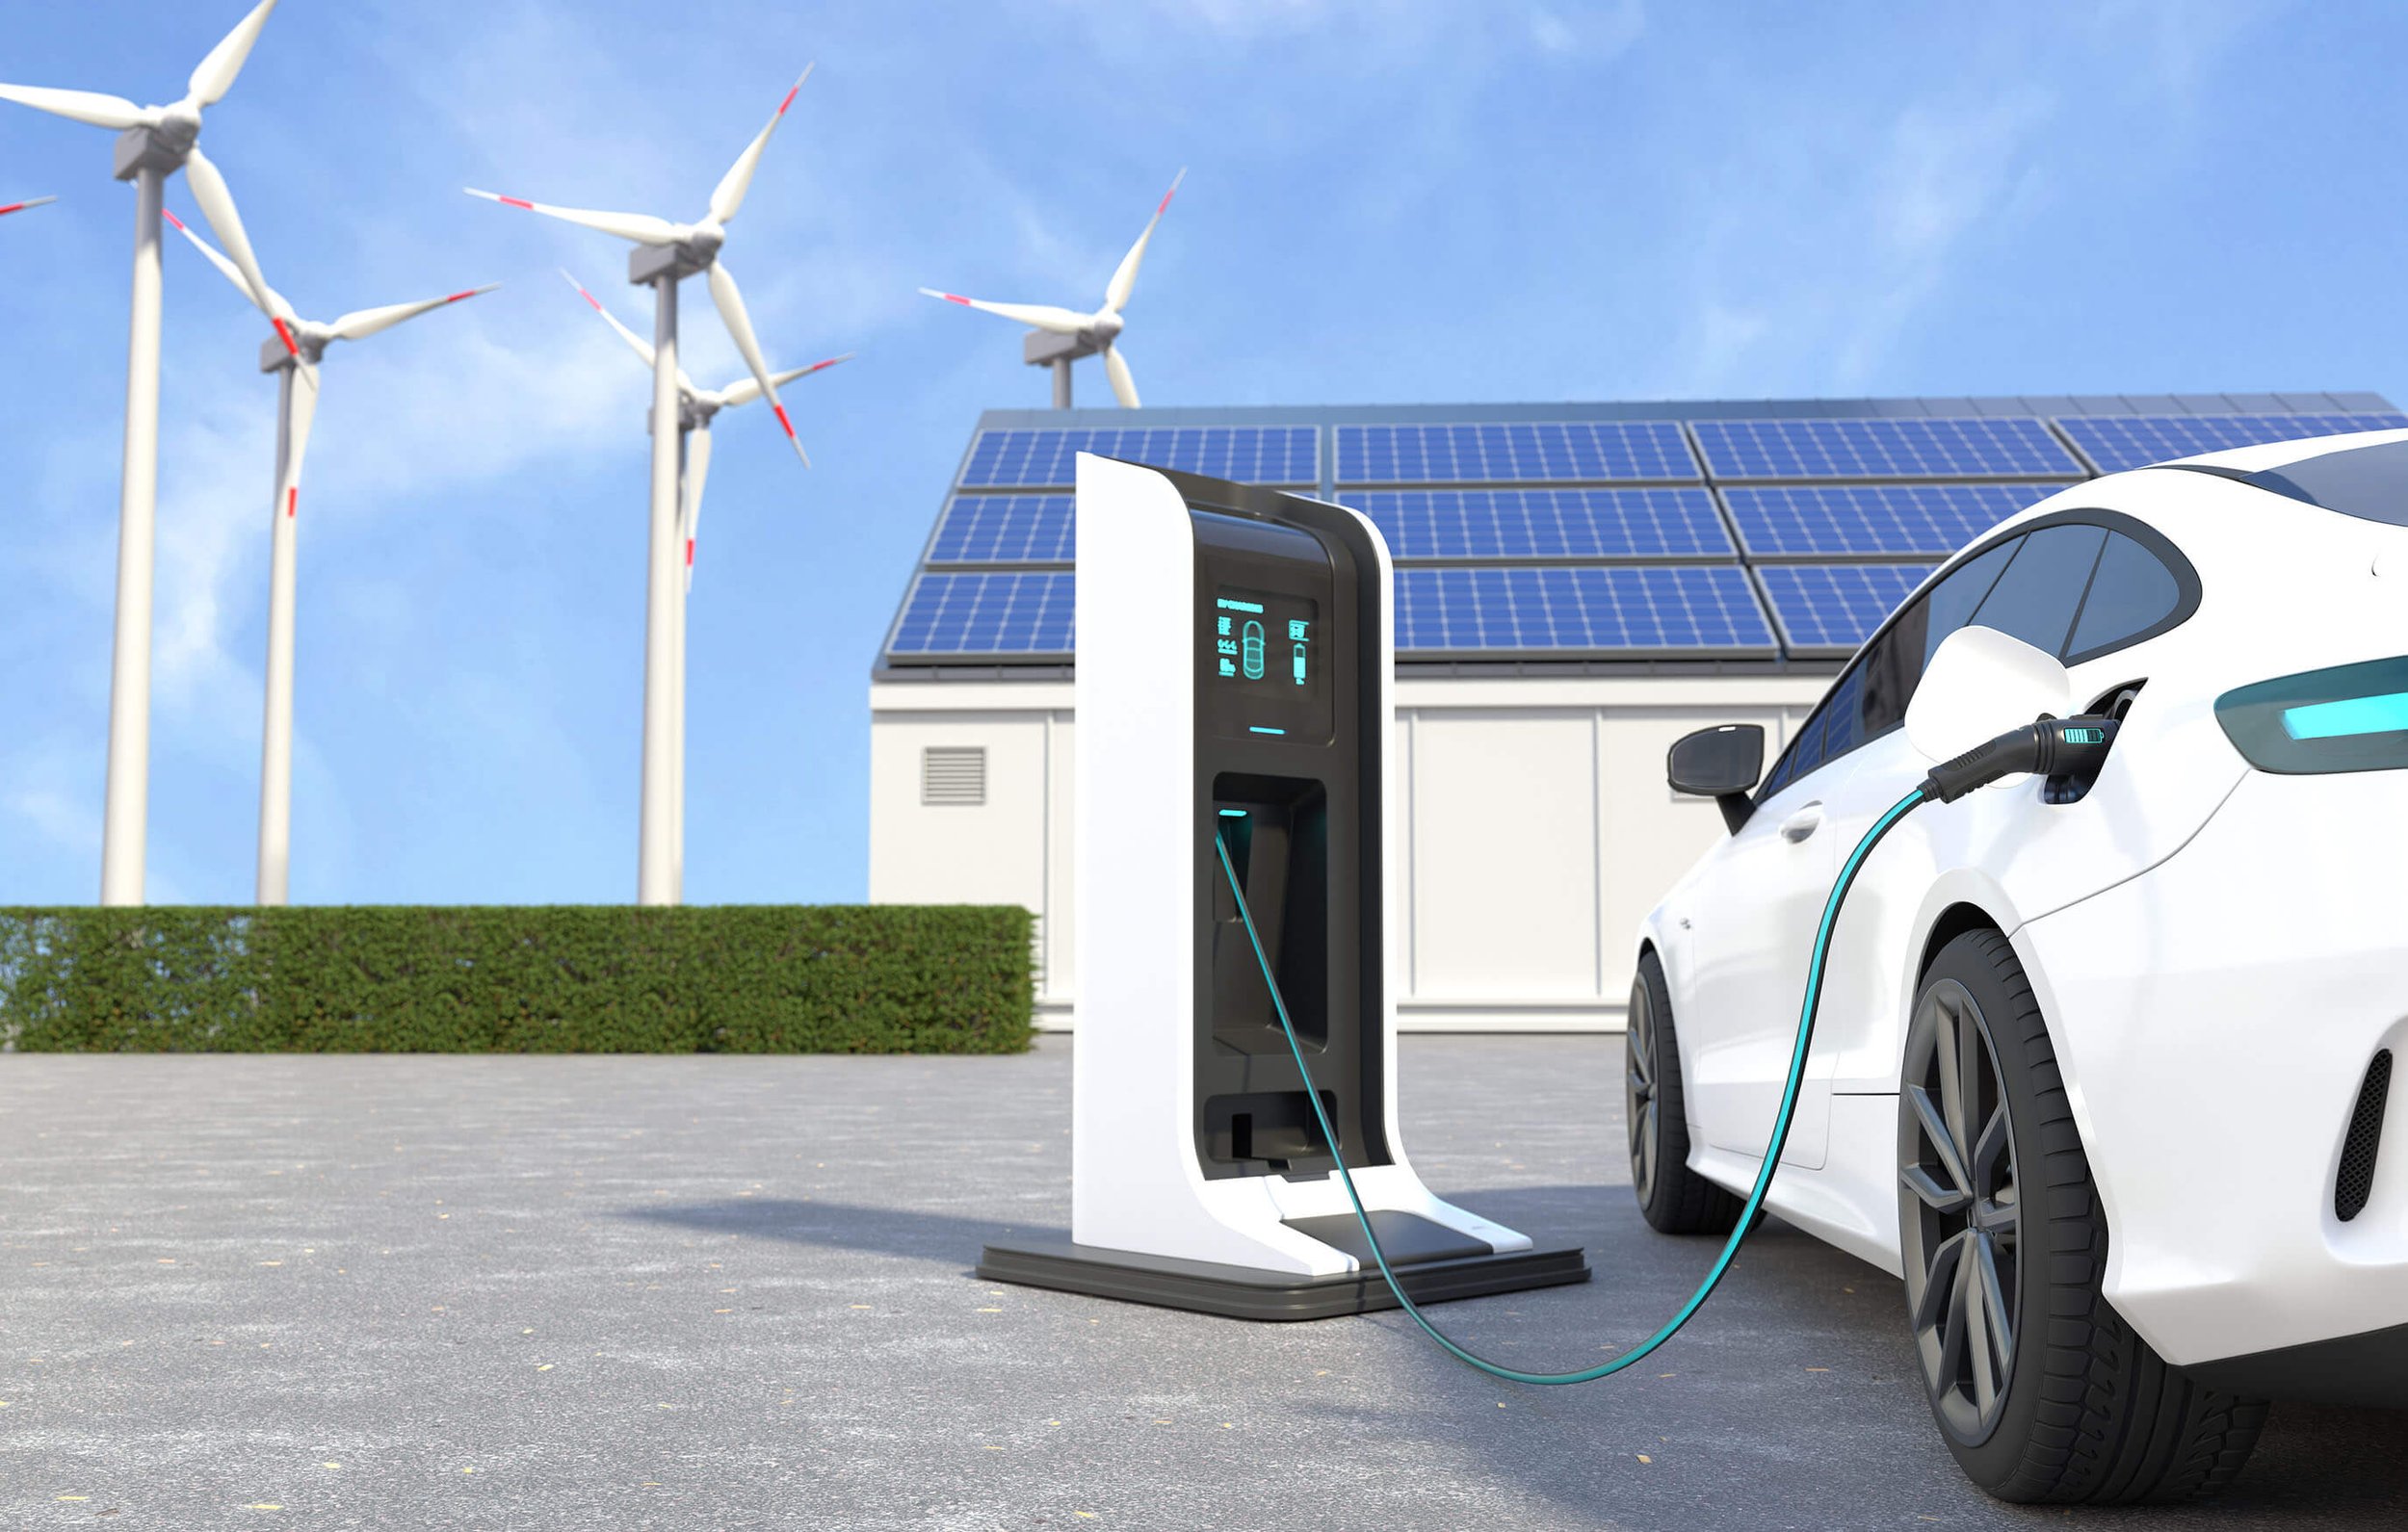   EV Charging System   Boosting EV adoption through marketing services, connecting stakeholders, and providing customized decarbonization solutions globally.   LEARN MORE  